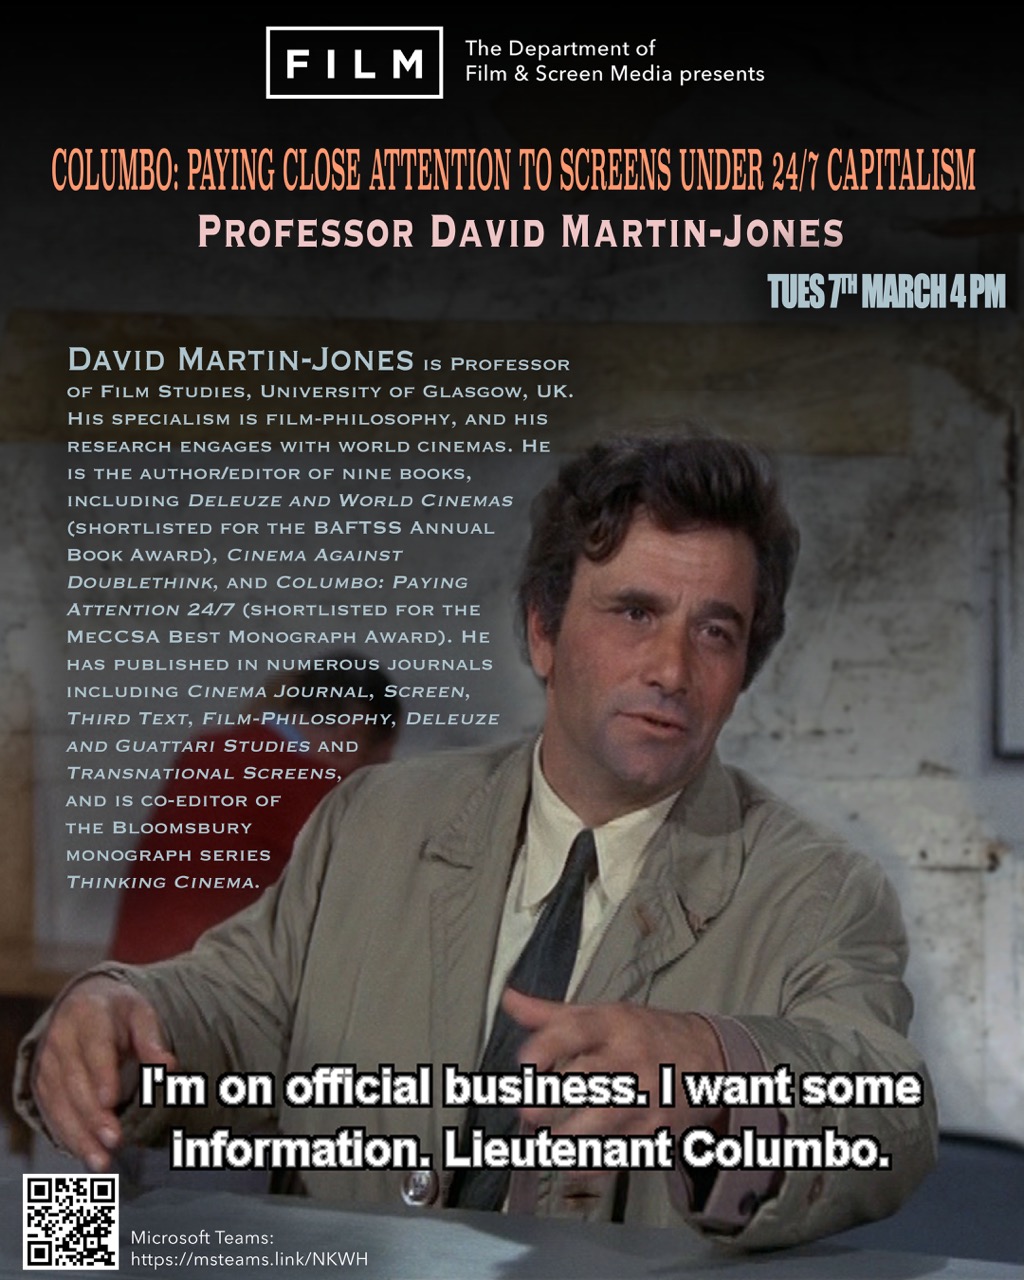 Columbo: Paying Close Attention to Screens under 24/7 Capitalism.  Professor David Martin-Jones, University of Glasgow. Tuesday 7th March at 4pm.